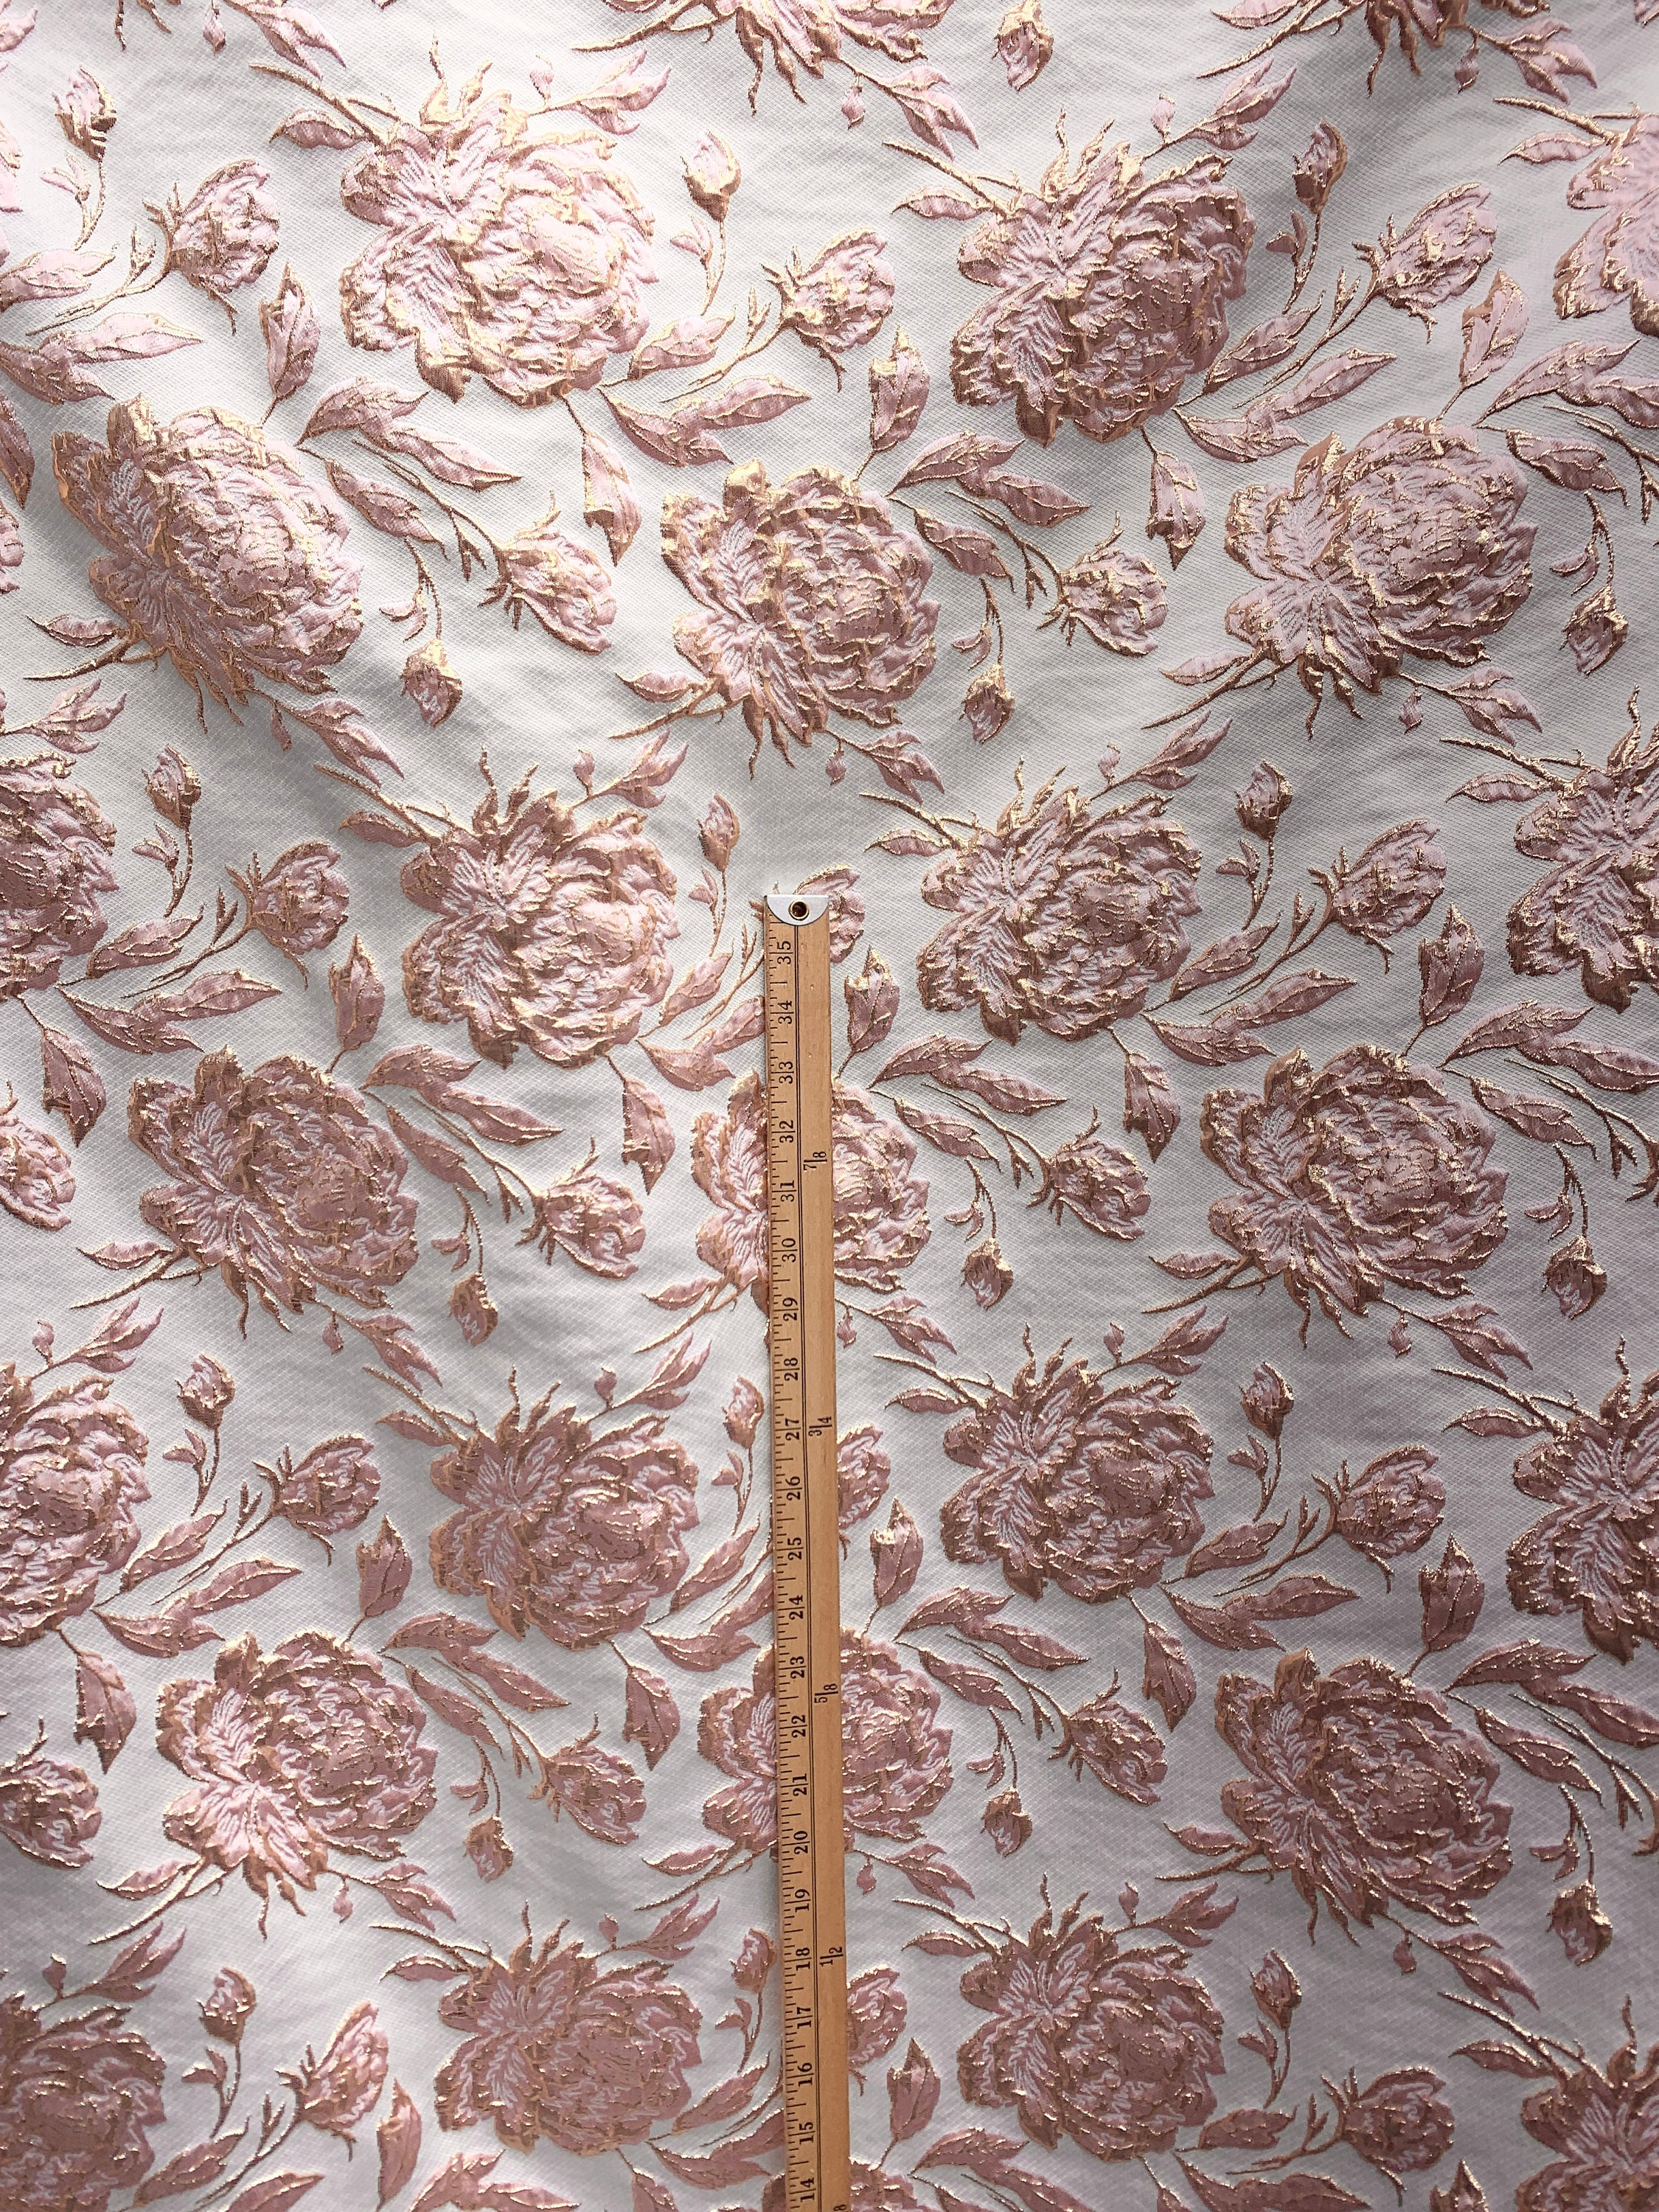 PINK GOLD Floral Brocade Fabric 60 In. Sold by the Yard -  Canada